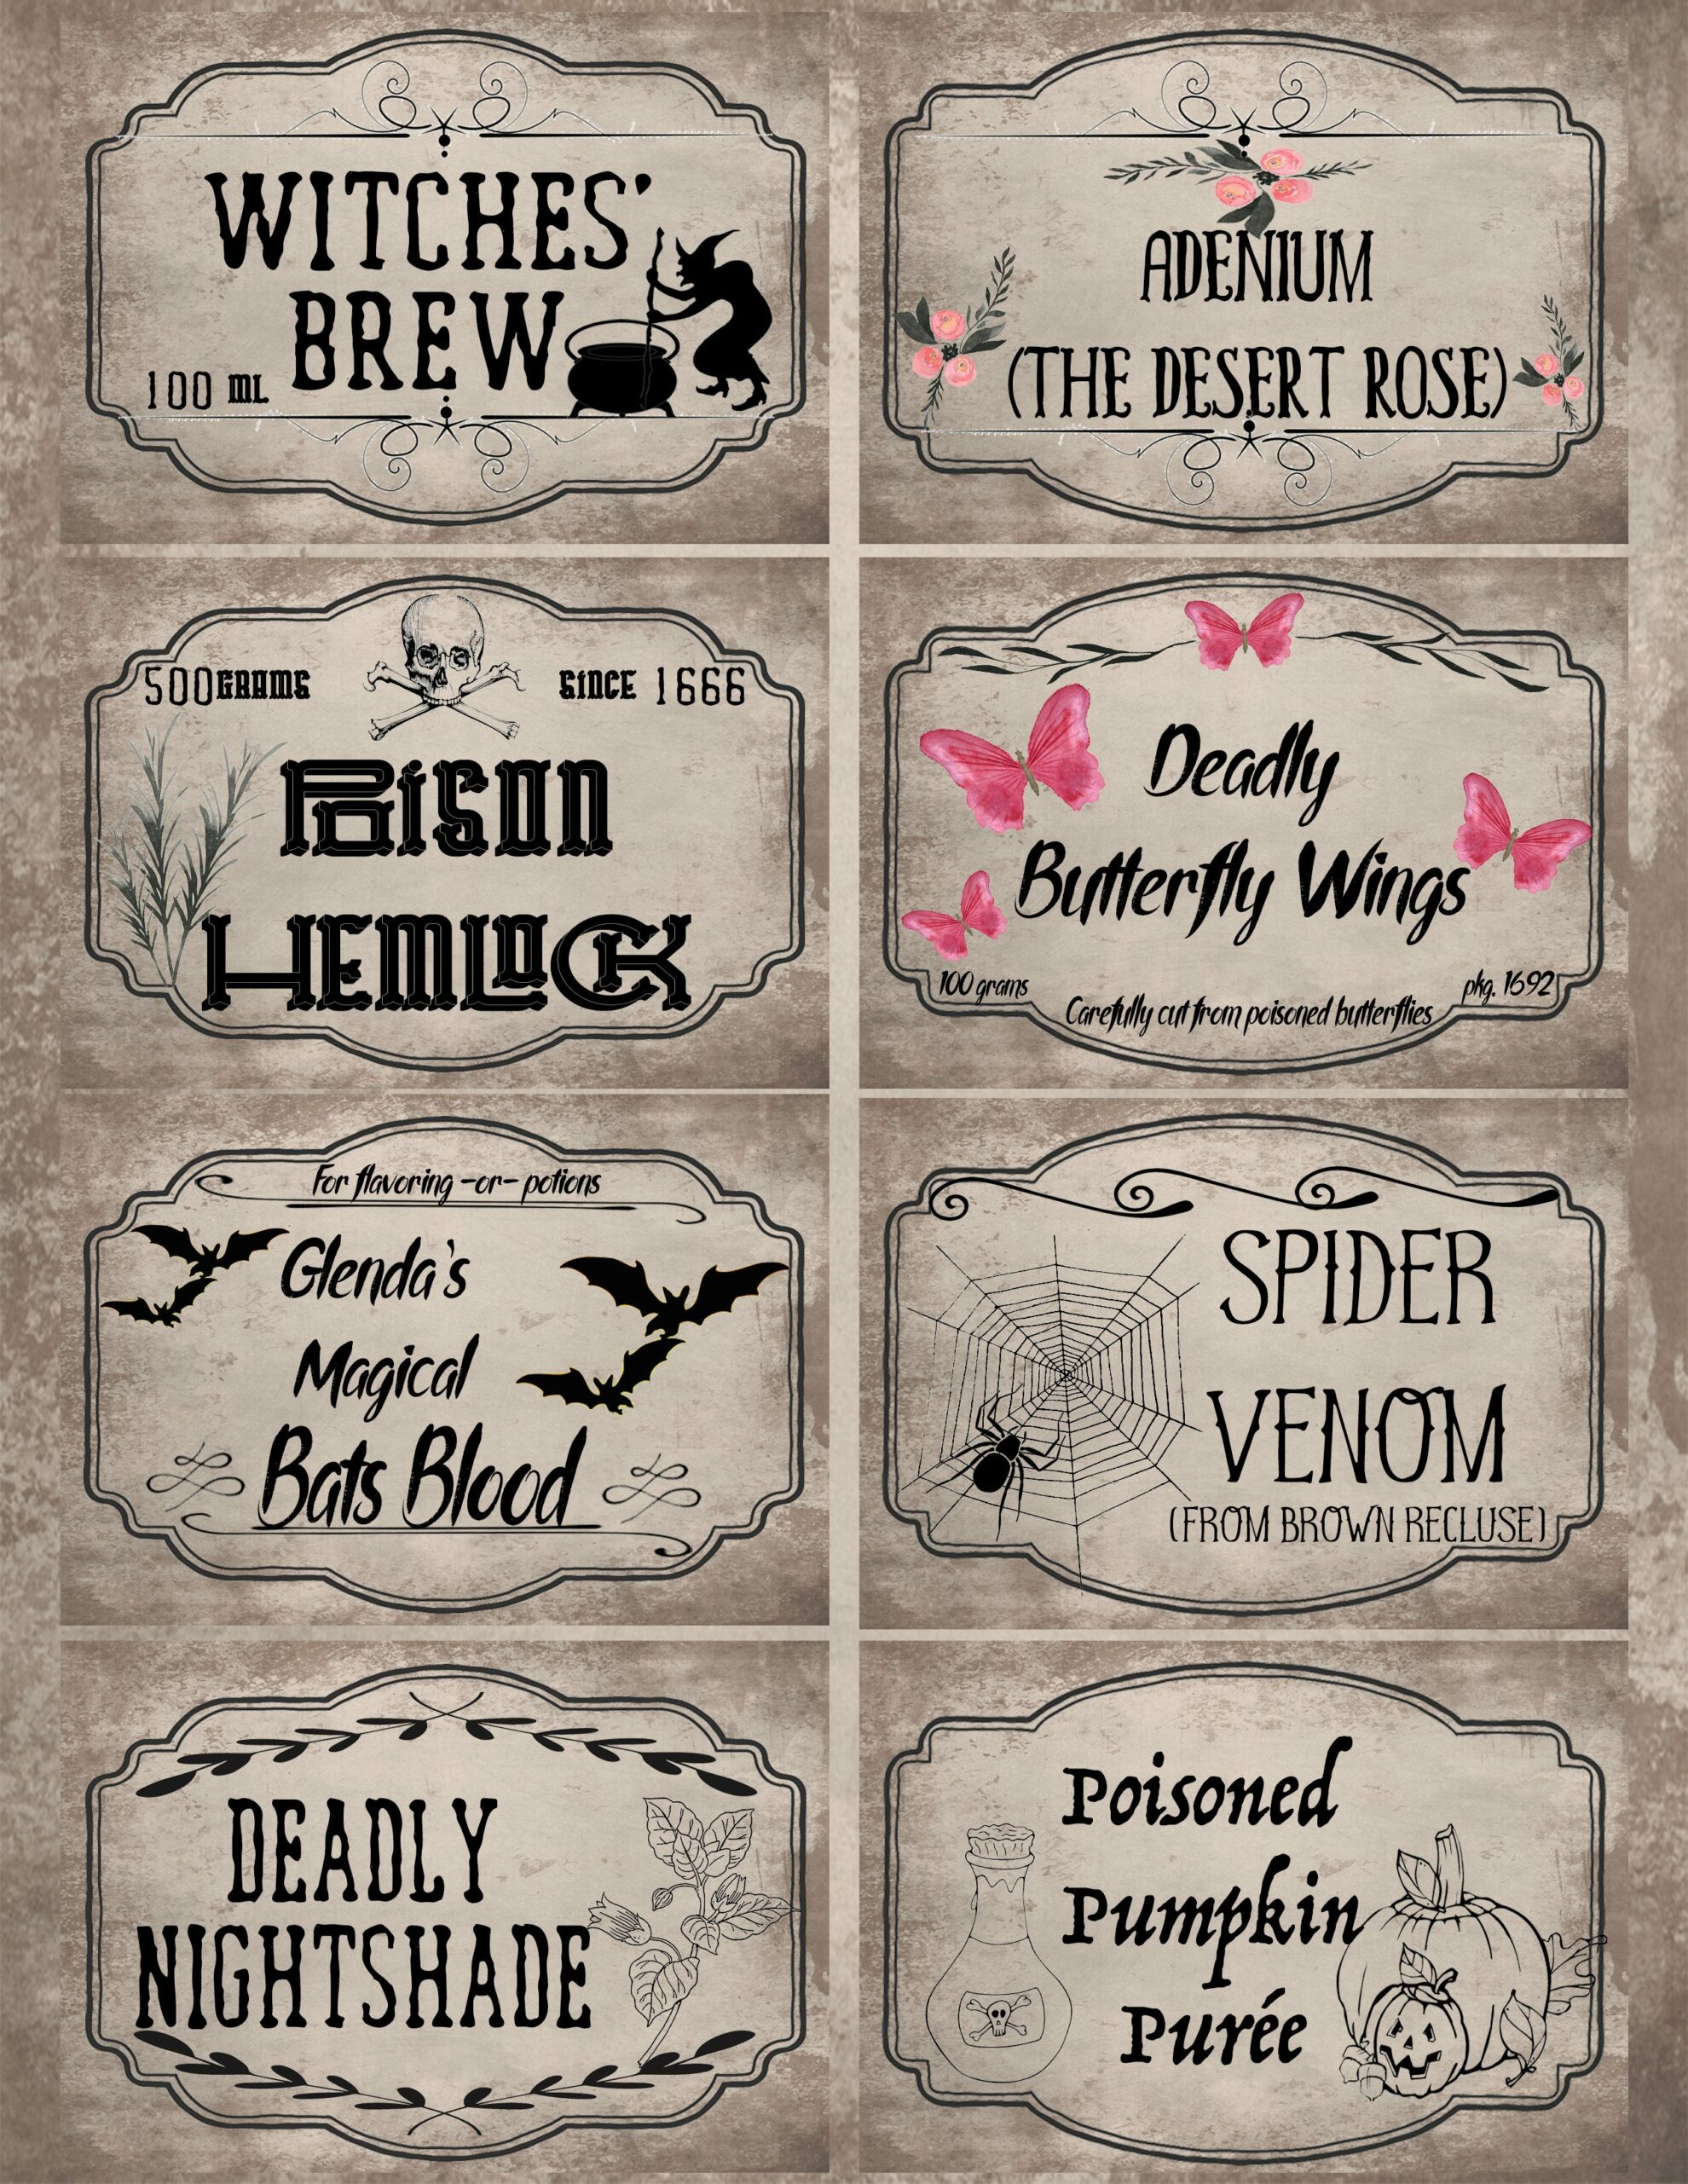 Free Printable Halloween Apothecary Labels 16 Designs Plus Blanks 